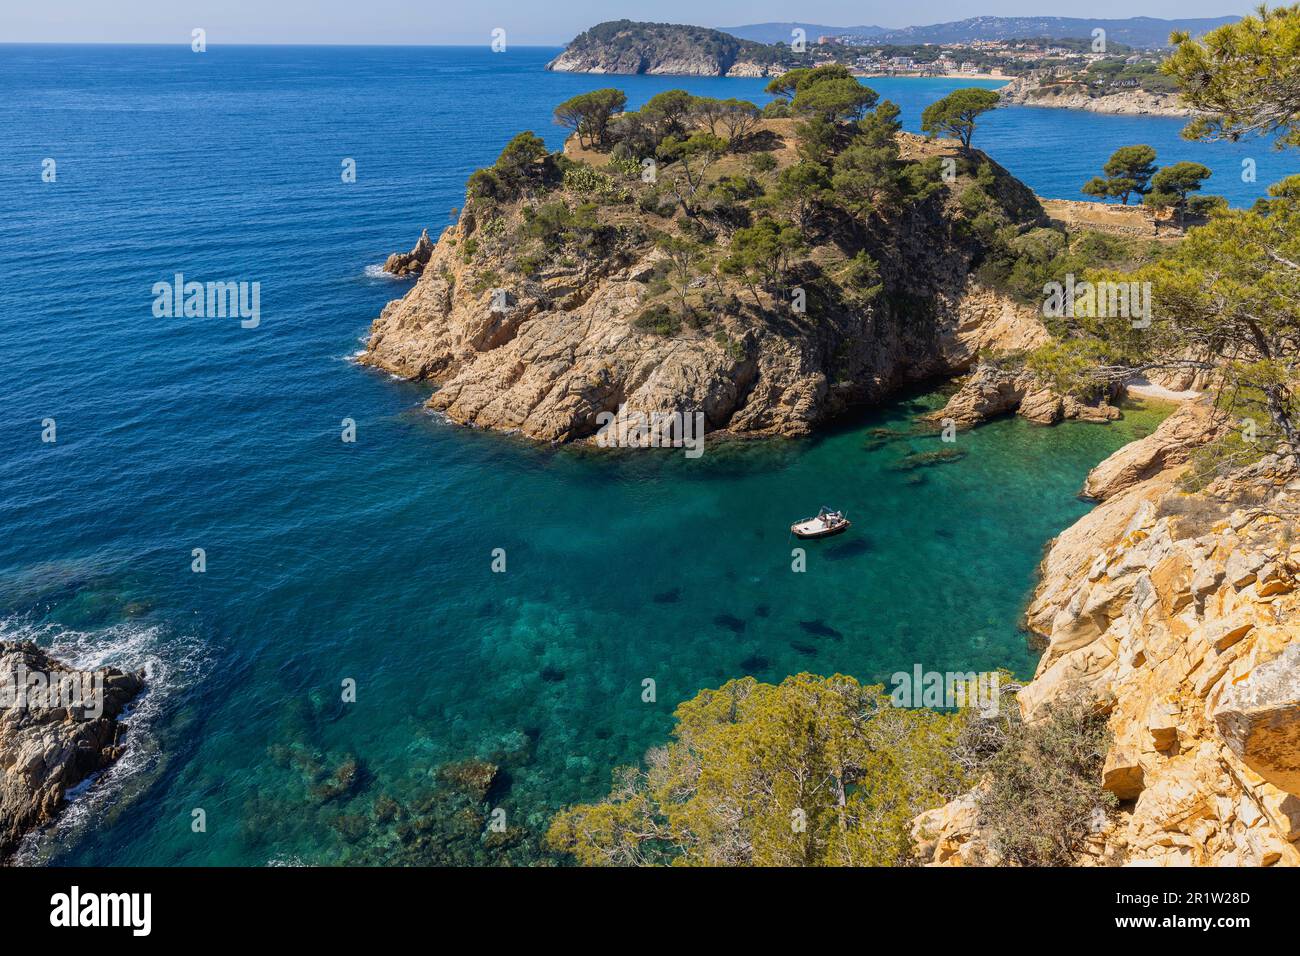 Nature in all its splendor: an experience for the senses. Costa Brava, near small town Palamos, Spain Stock Photo